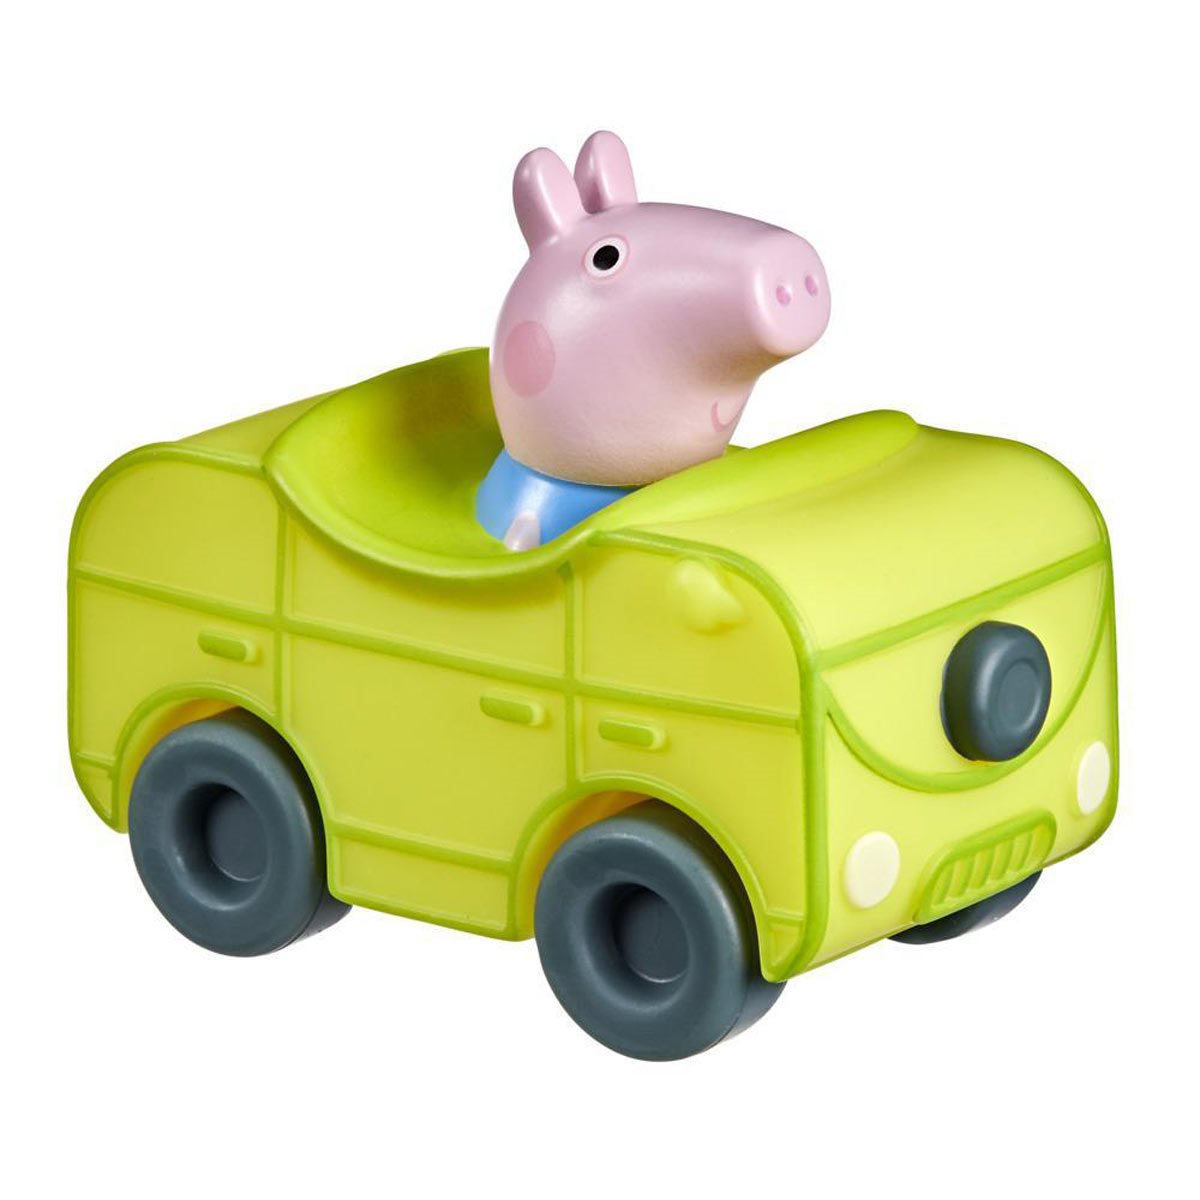 Peppa Pig Peppa's Adventures Little Boat Toy Includes 3-inch George Pig  Figure